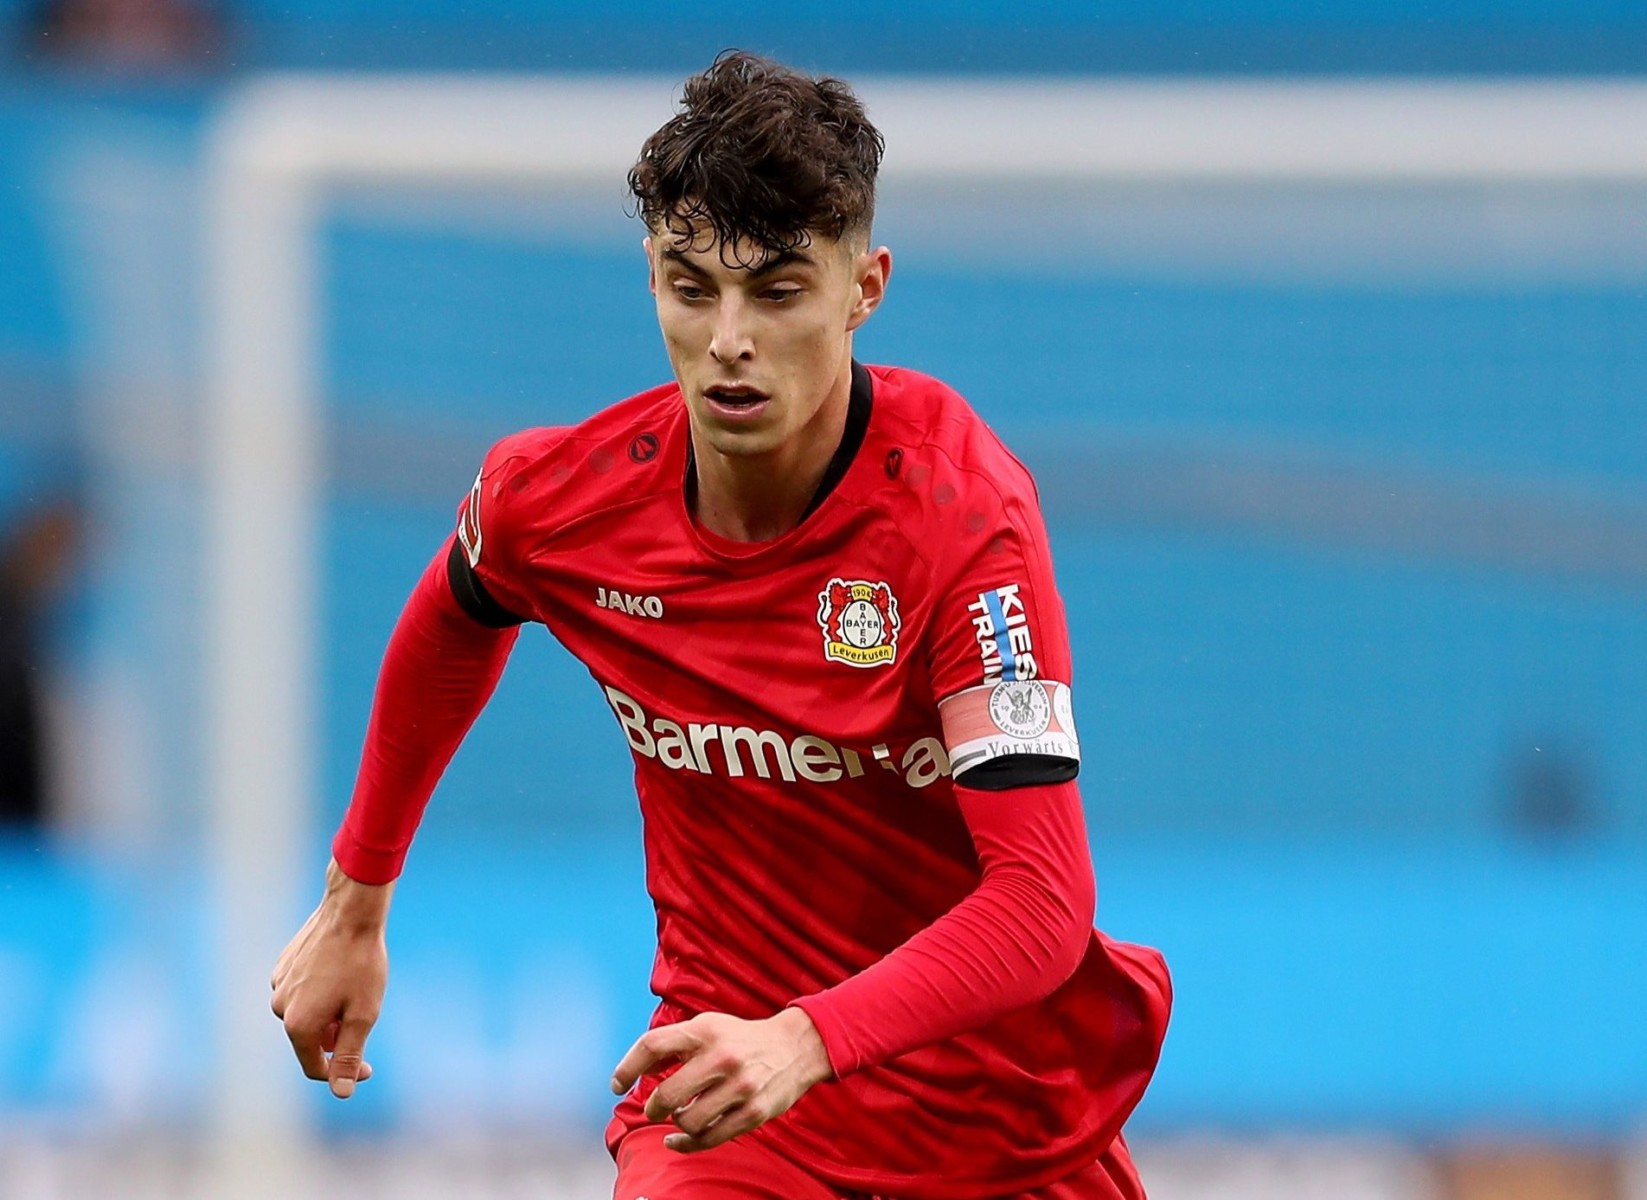 , From Kai Havertz to Lautaro Martinez, SunSport scouts Europe’s top talent Prem clubs with fight for this transfer window